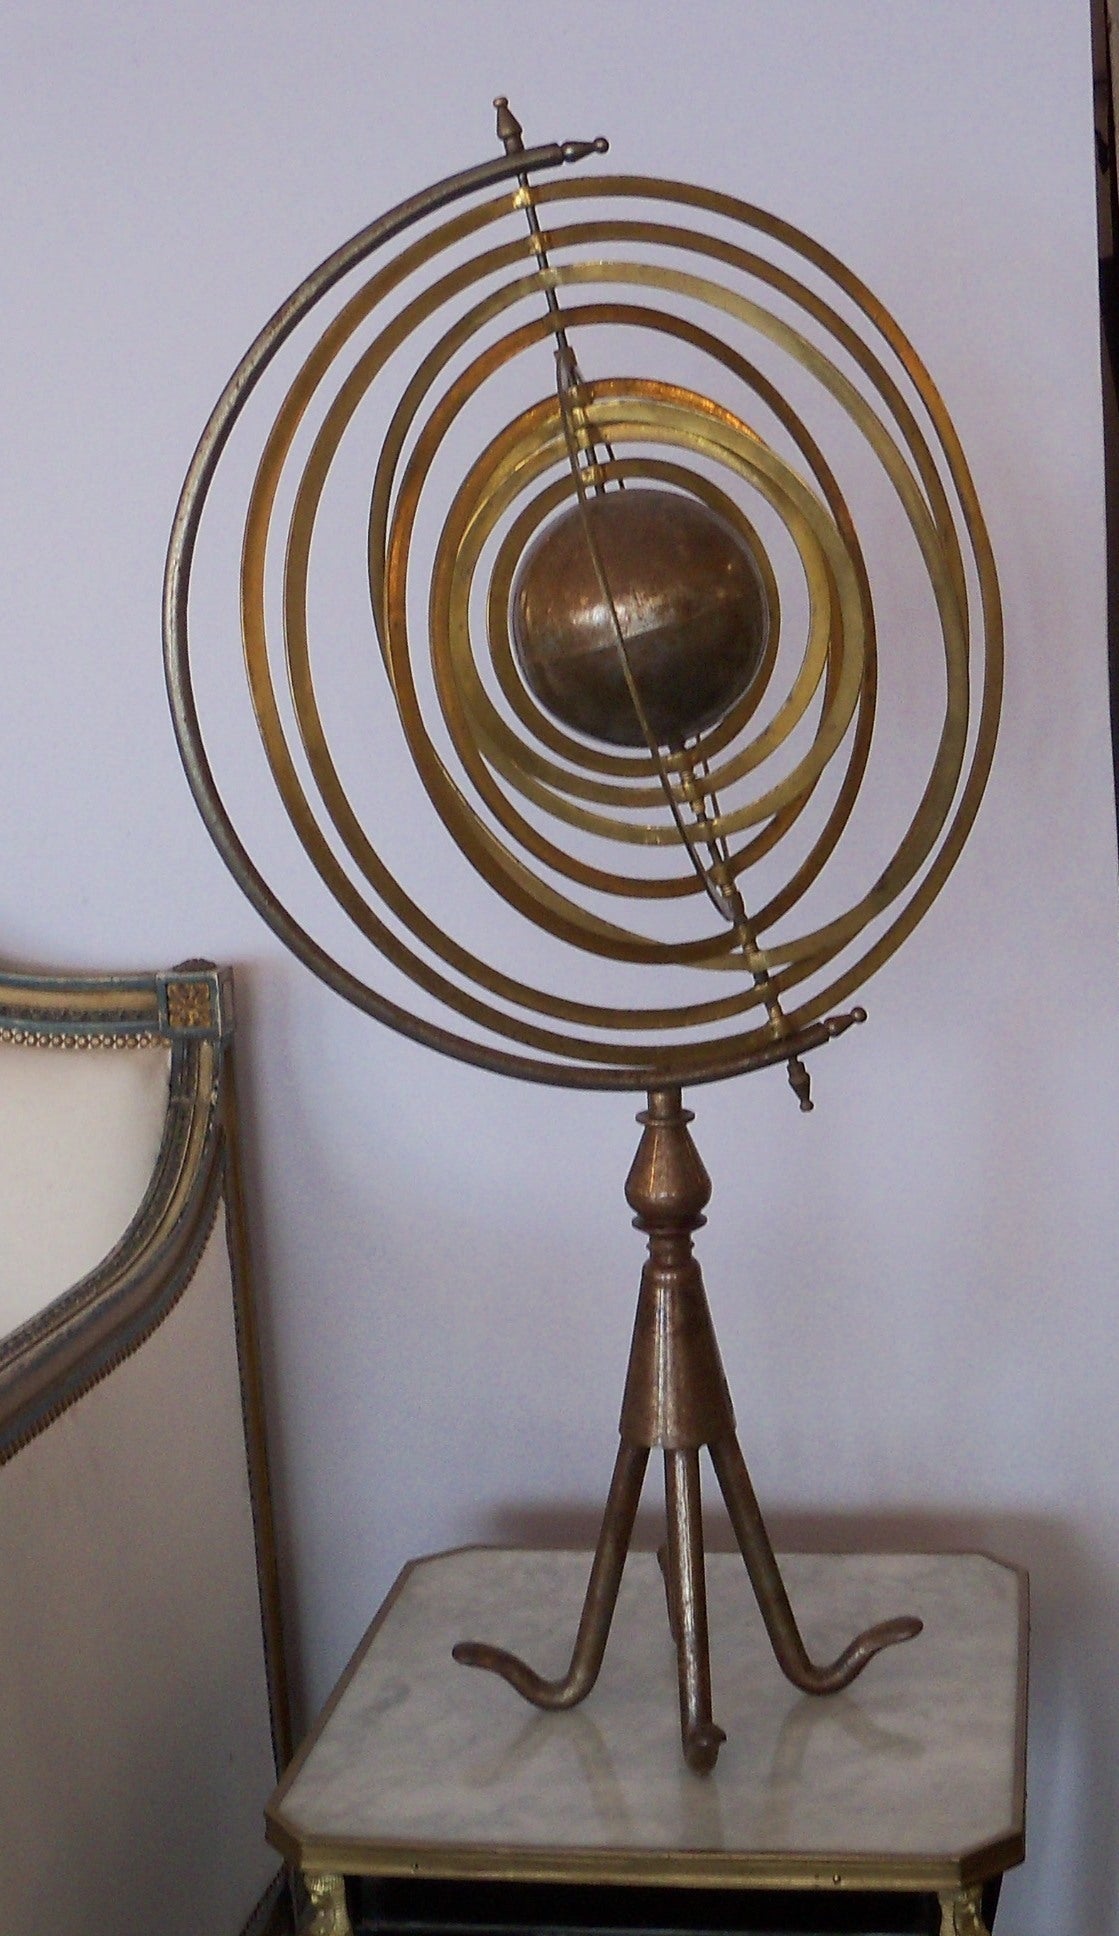 Visually arresting Italian steel and brass armillary sphere, circa 1900. There is a central steel globe and nine graduated concentric brass rings which rotate on a central axis, held in place by a stationary semicircle which is raised on a steel